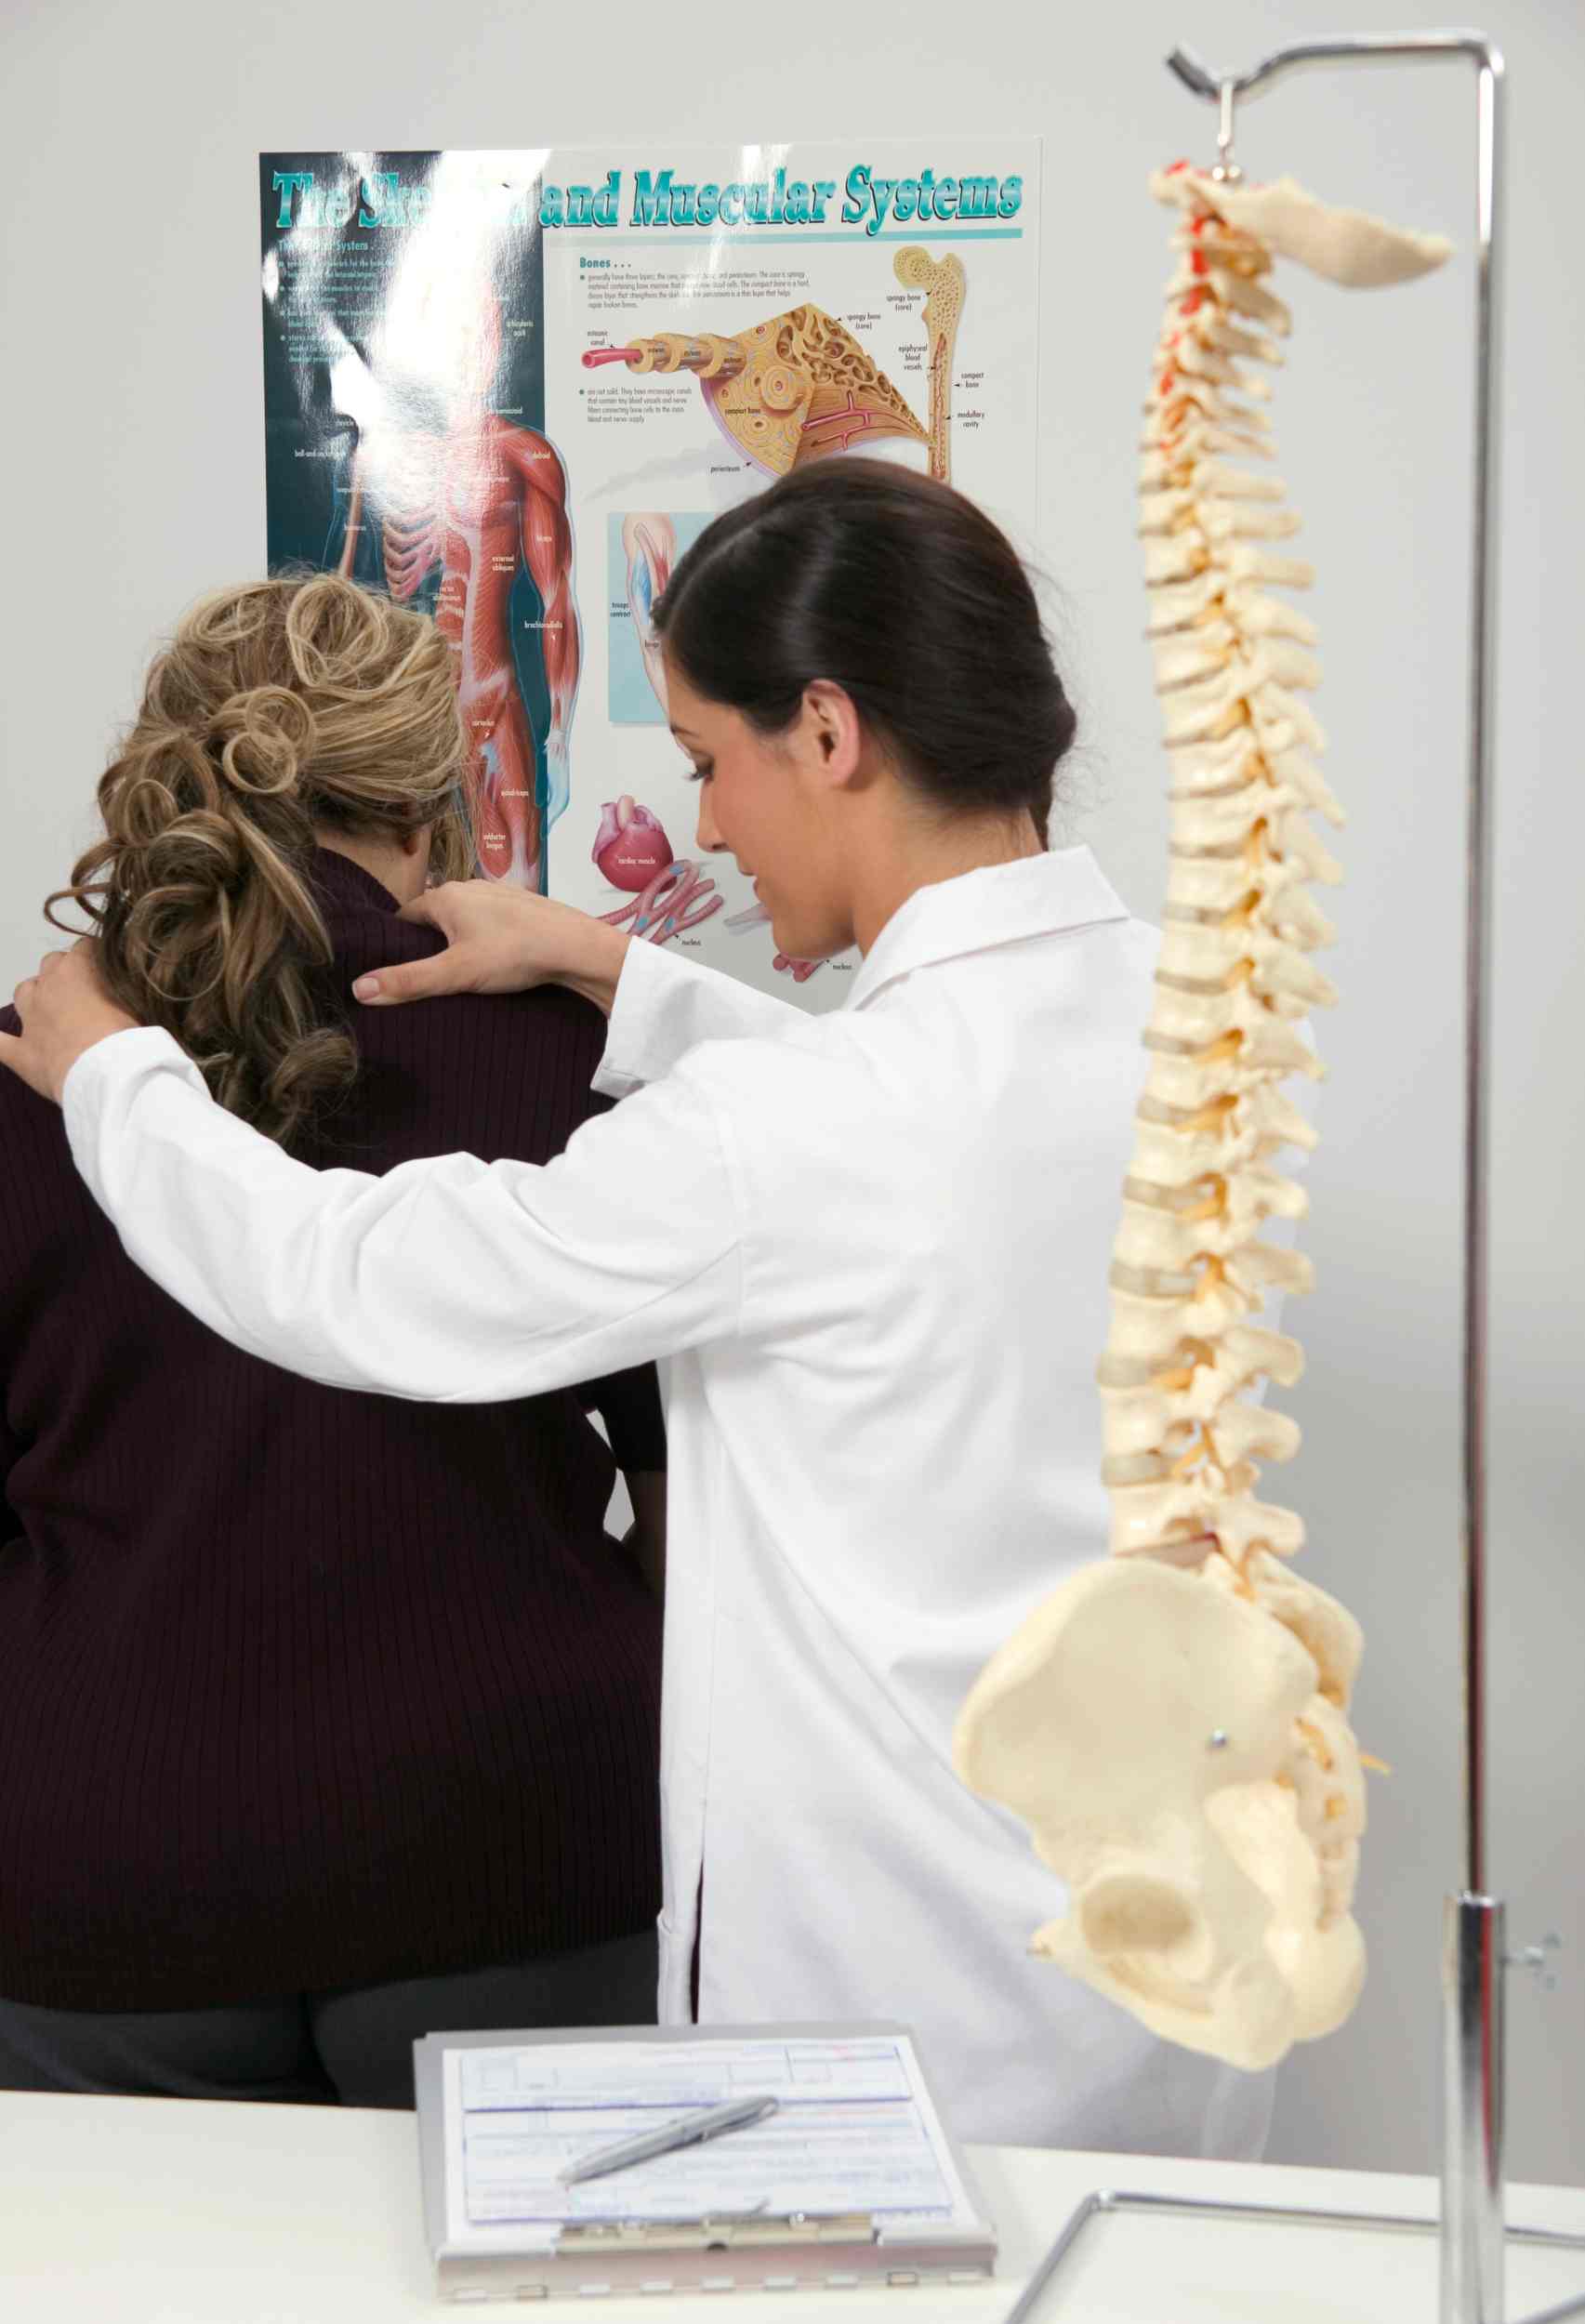 How a Chiropractor Can Help Improve Your Health